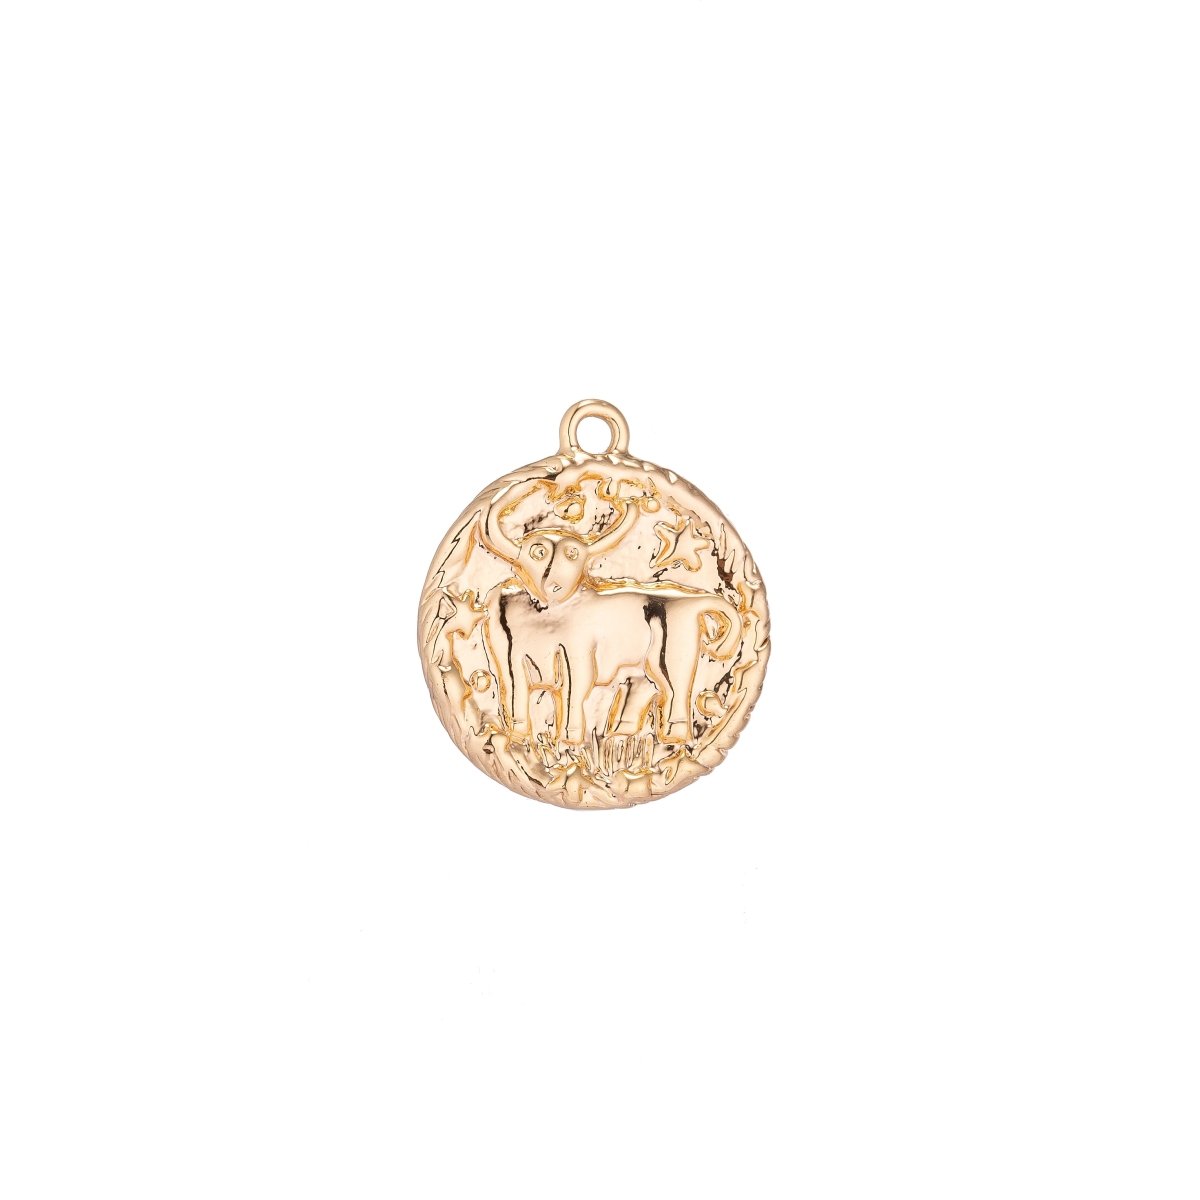 18K Gold Filled Small Size Zodiac Horoscope Sign Constellation Medallion Pendant Charm Rustic Rough Hammered Coin for Necklace Jewelry Making - DLUXCA